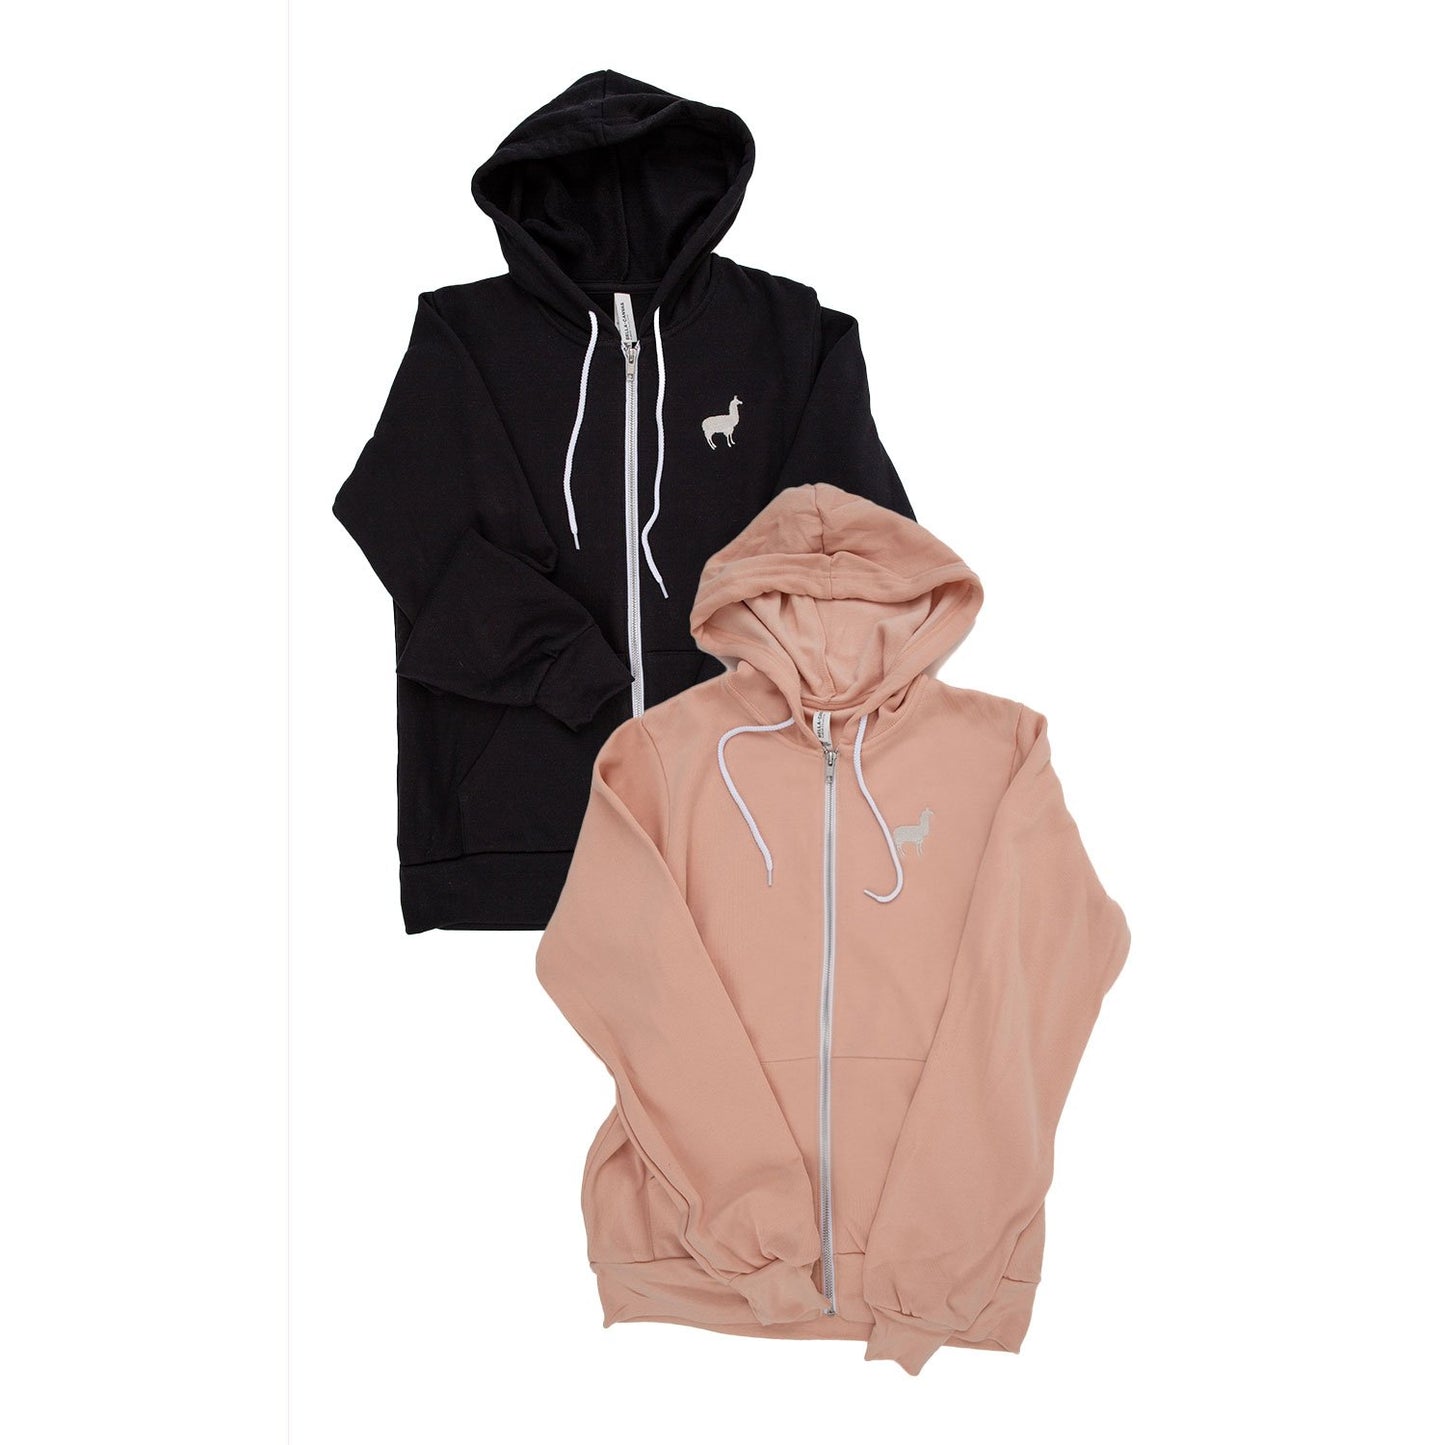 Image of black and peach Embroidered Llama Zip Up Hoodies.